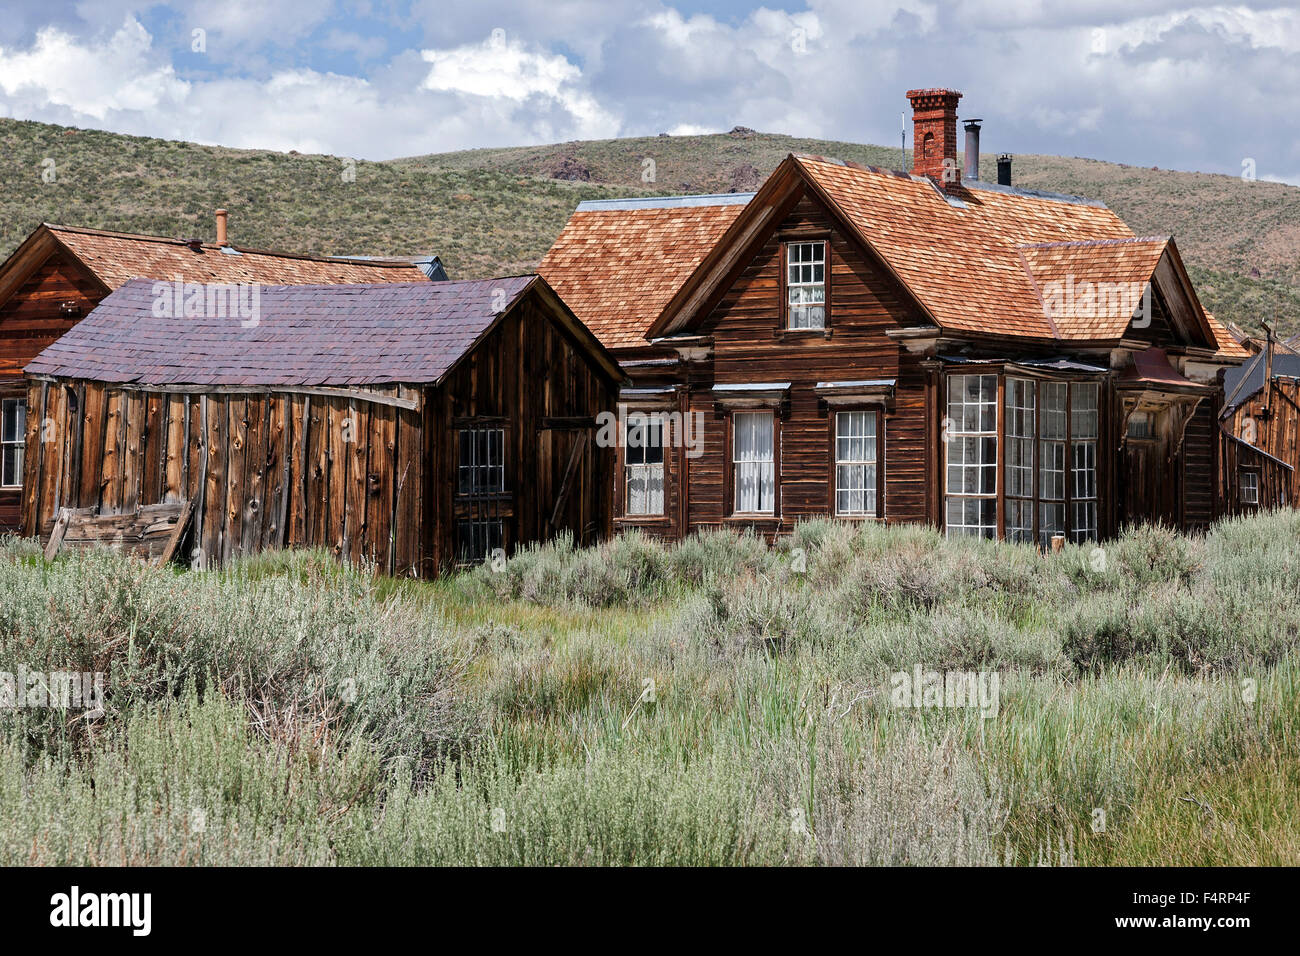 Old wooden houses, ghost town, old gold mining town, Bodie State Historic Park, Bodie, California, USA Stock Photo